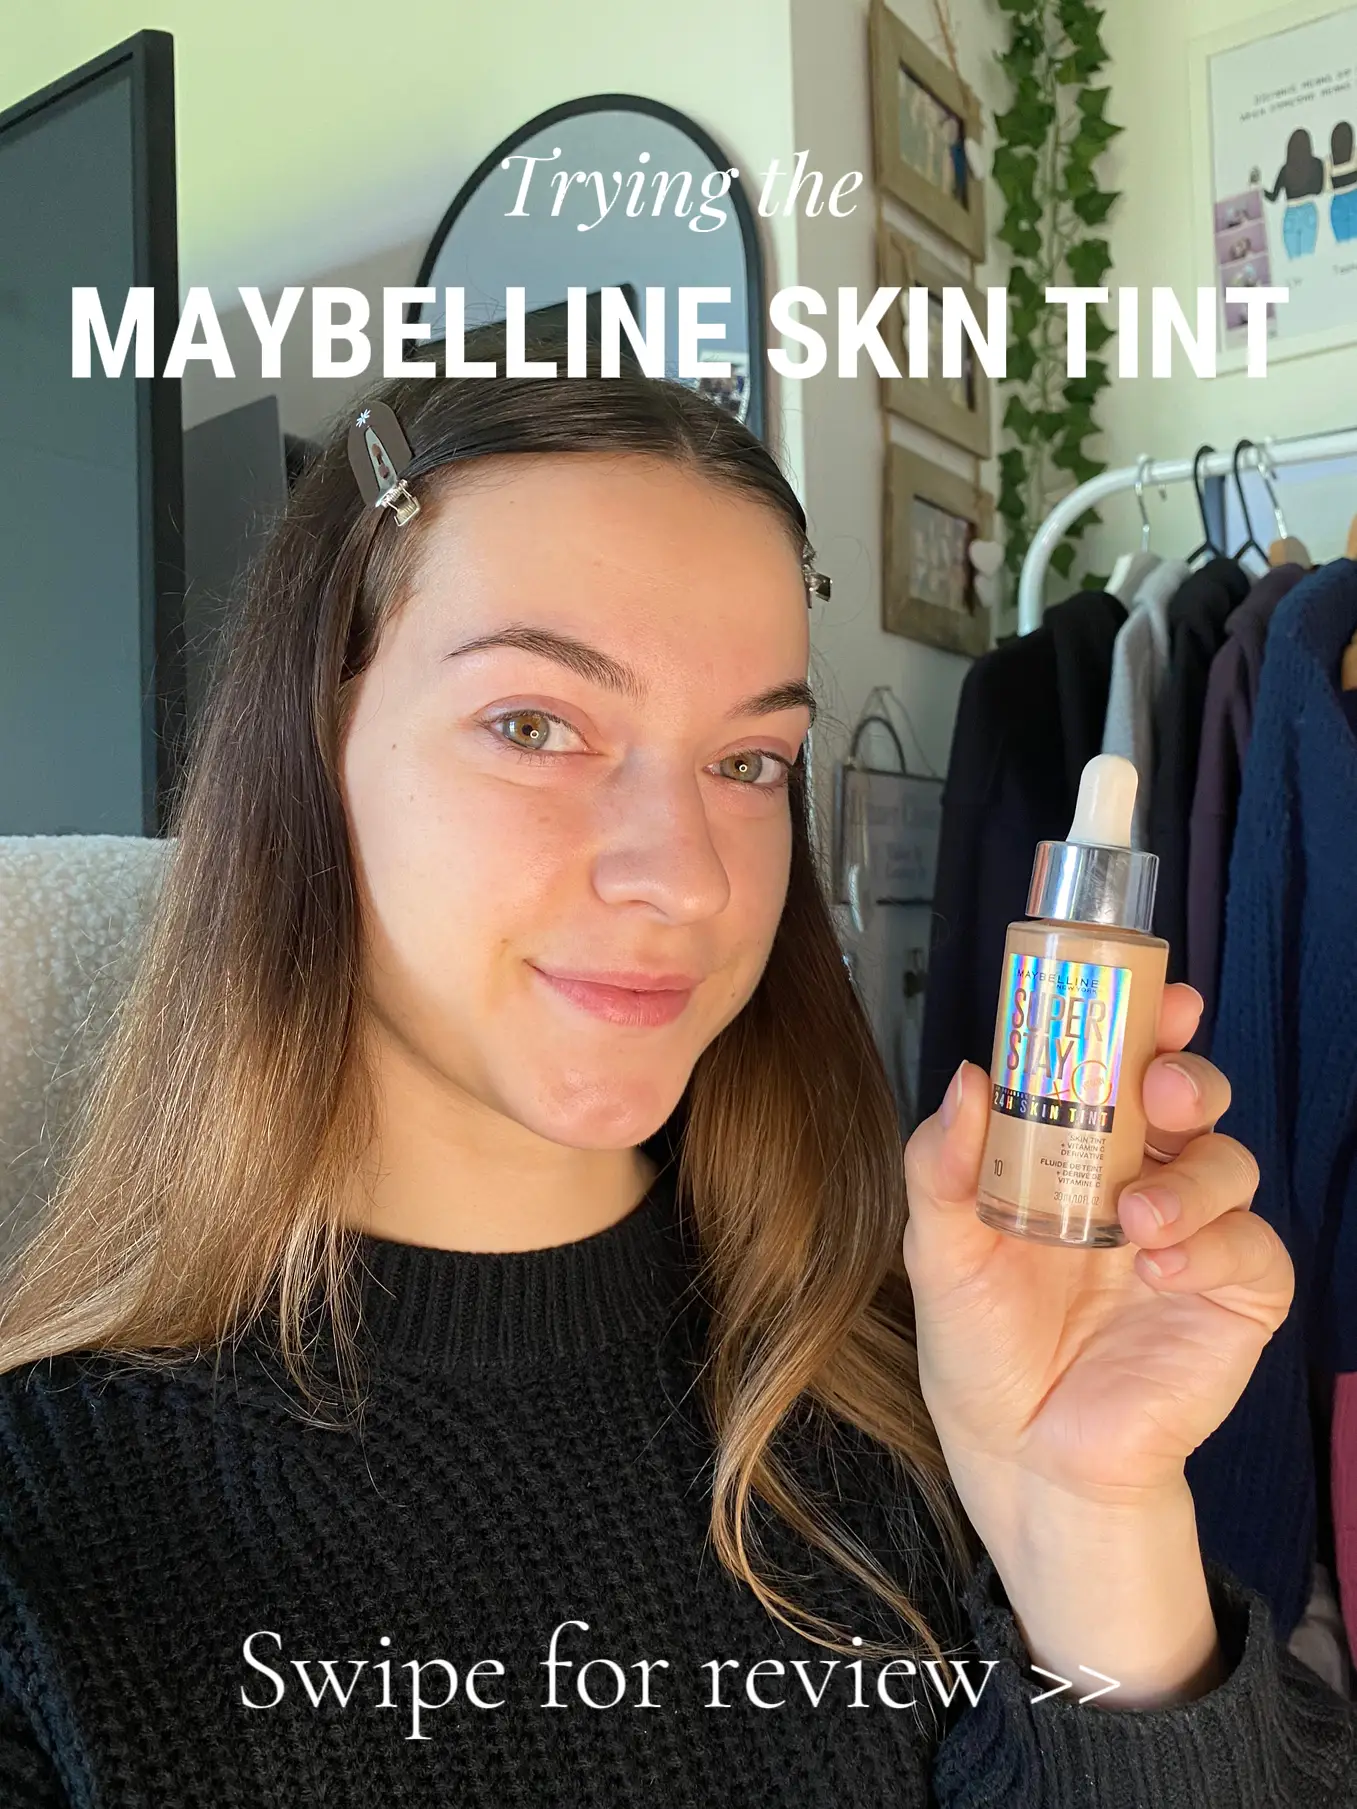 NEW MAYBELLINE SUPERSTAY 24H SKIN TINT vs L'ORÉAL TRUE MATCH NUDE